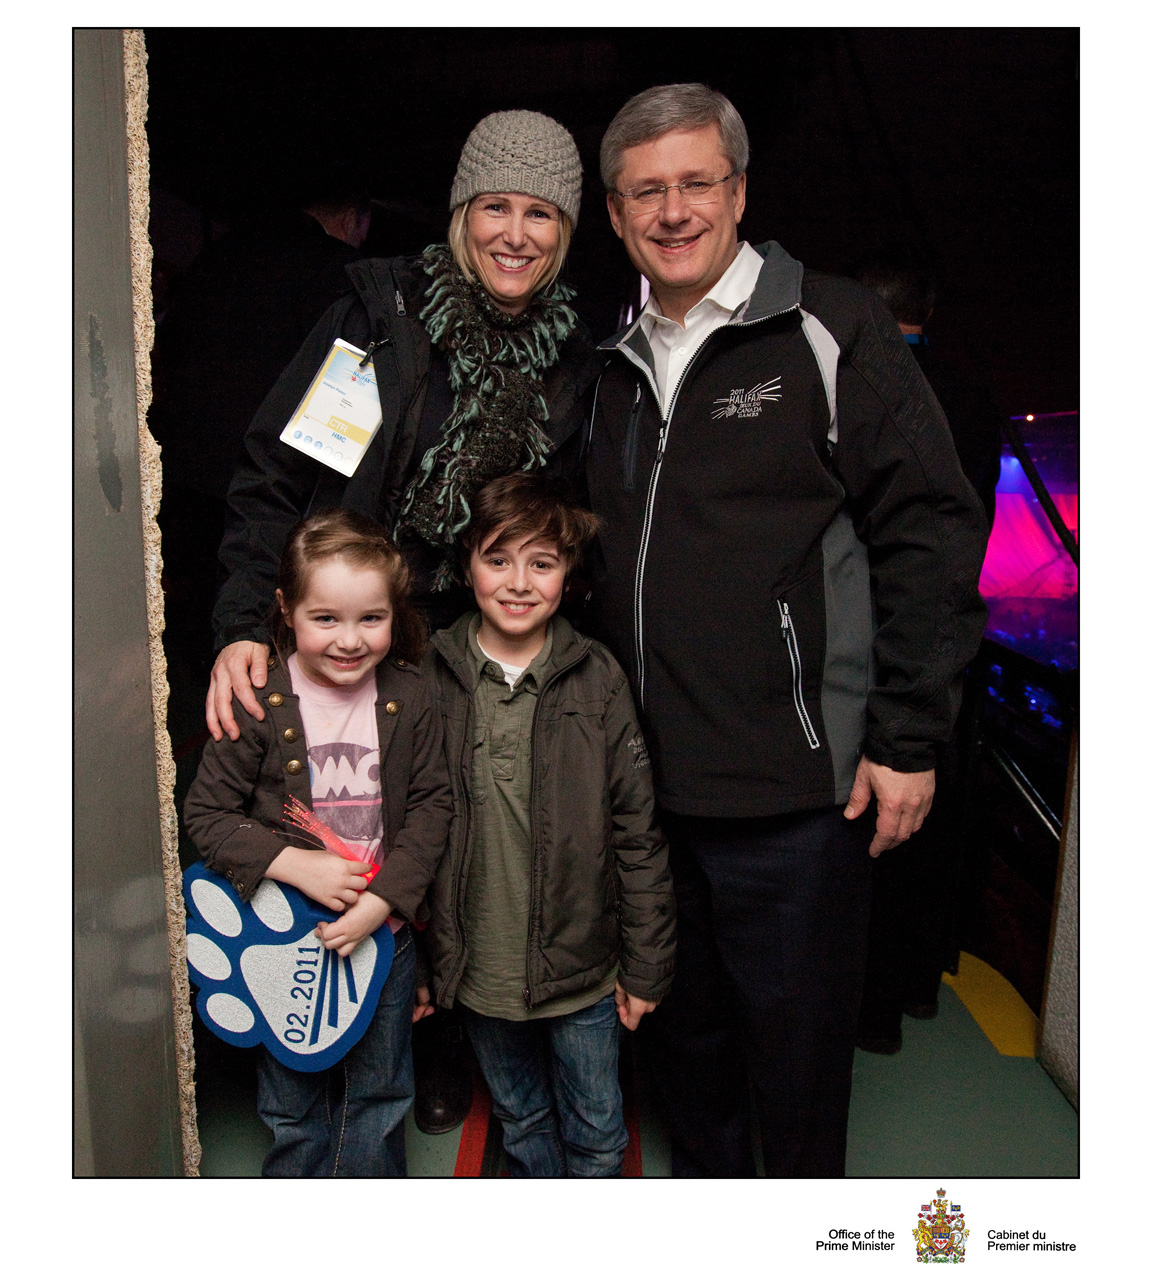 Valin, Mom and Sis meet the Prime Minister of Canada back stage at the 2011 Canada Winter Games. Mom was the co-director of the ceremonies.